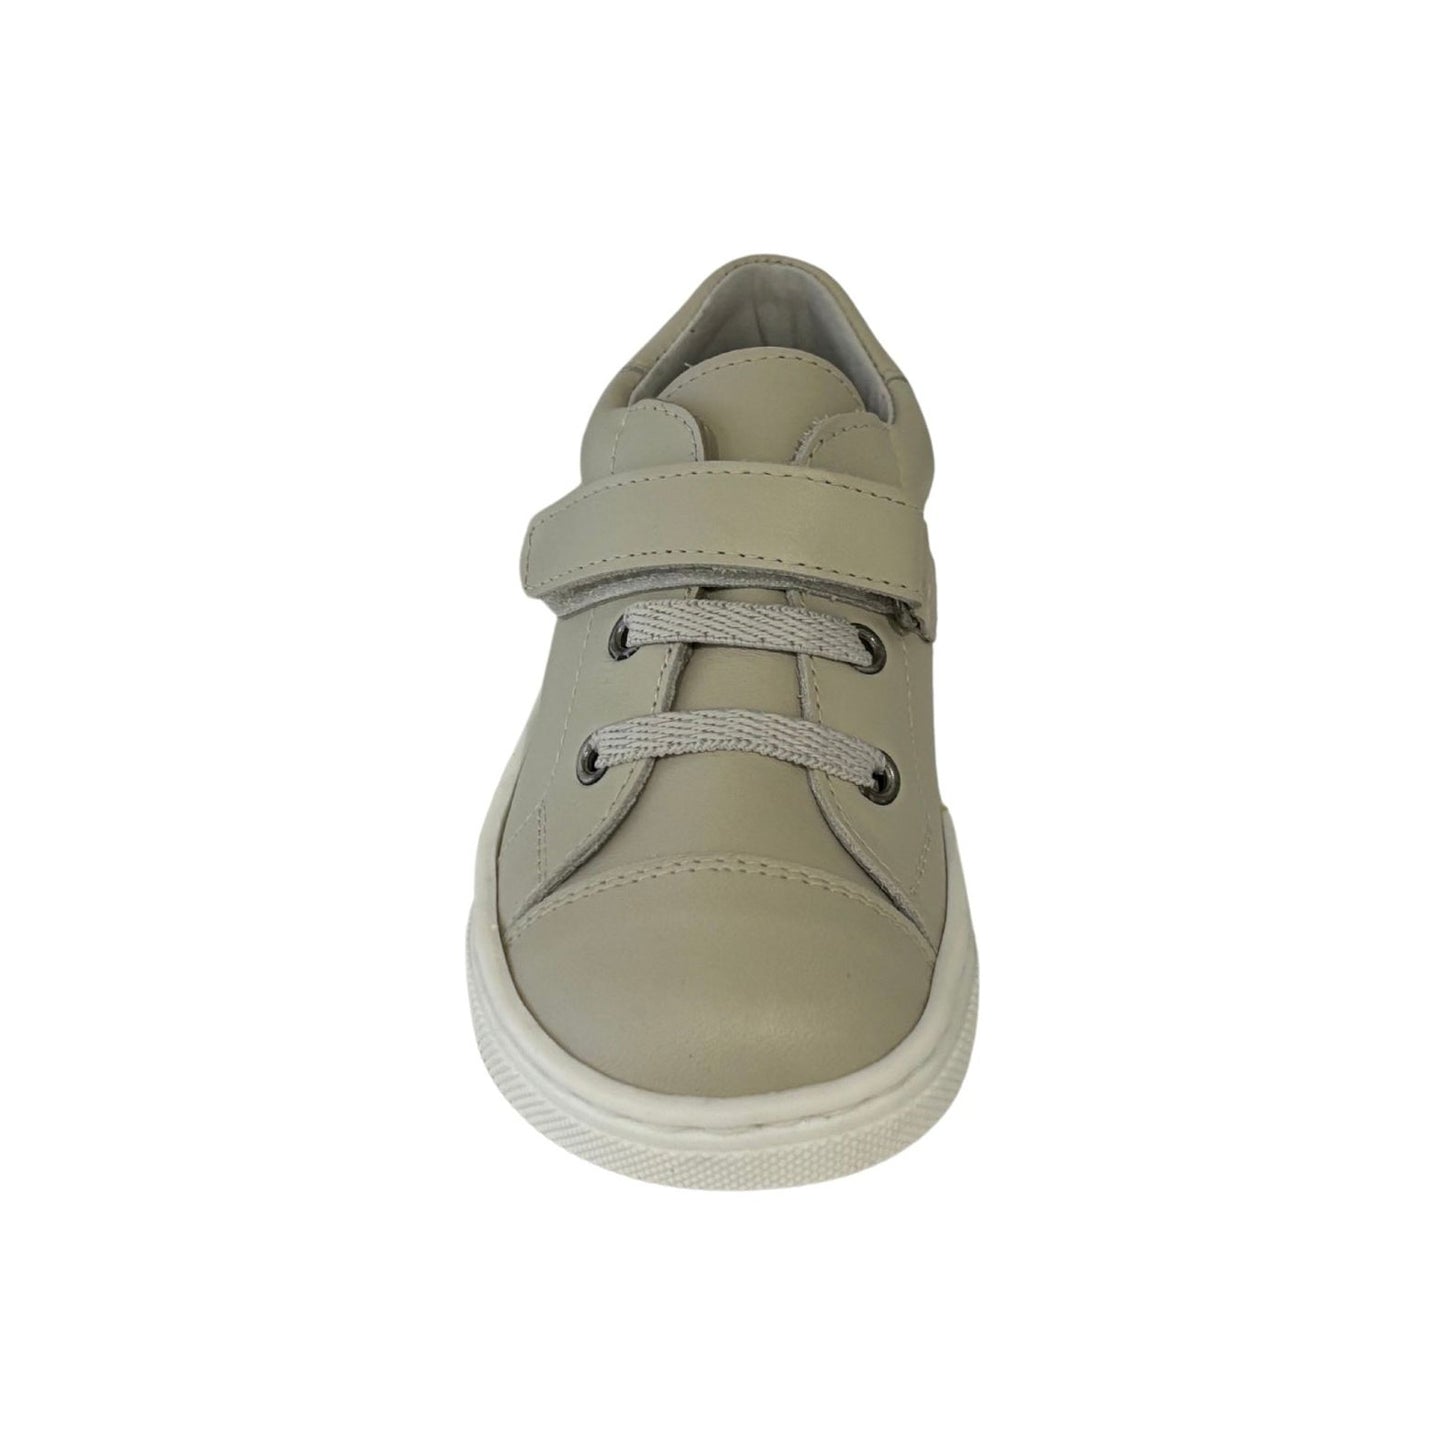 Load image into Gallery viewer, Boys trainers with velcro strap in Beige - Andanines
